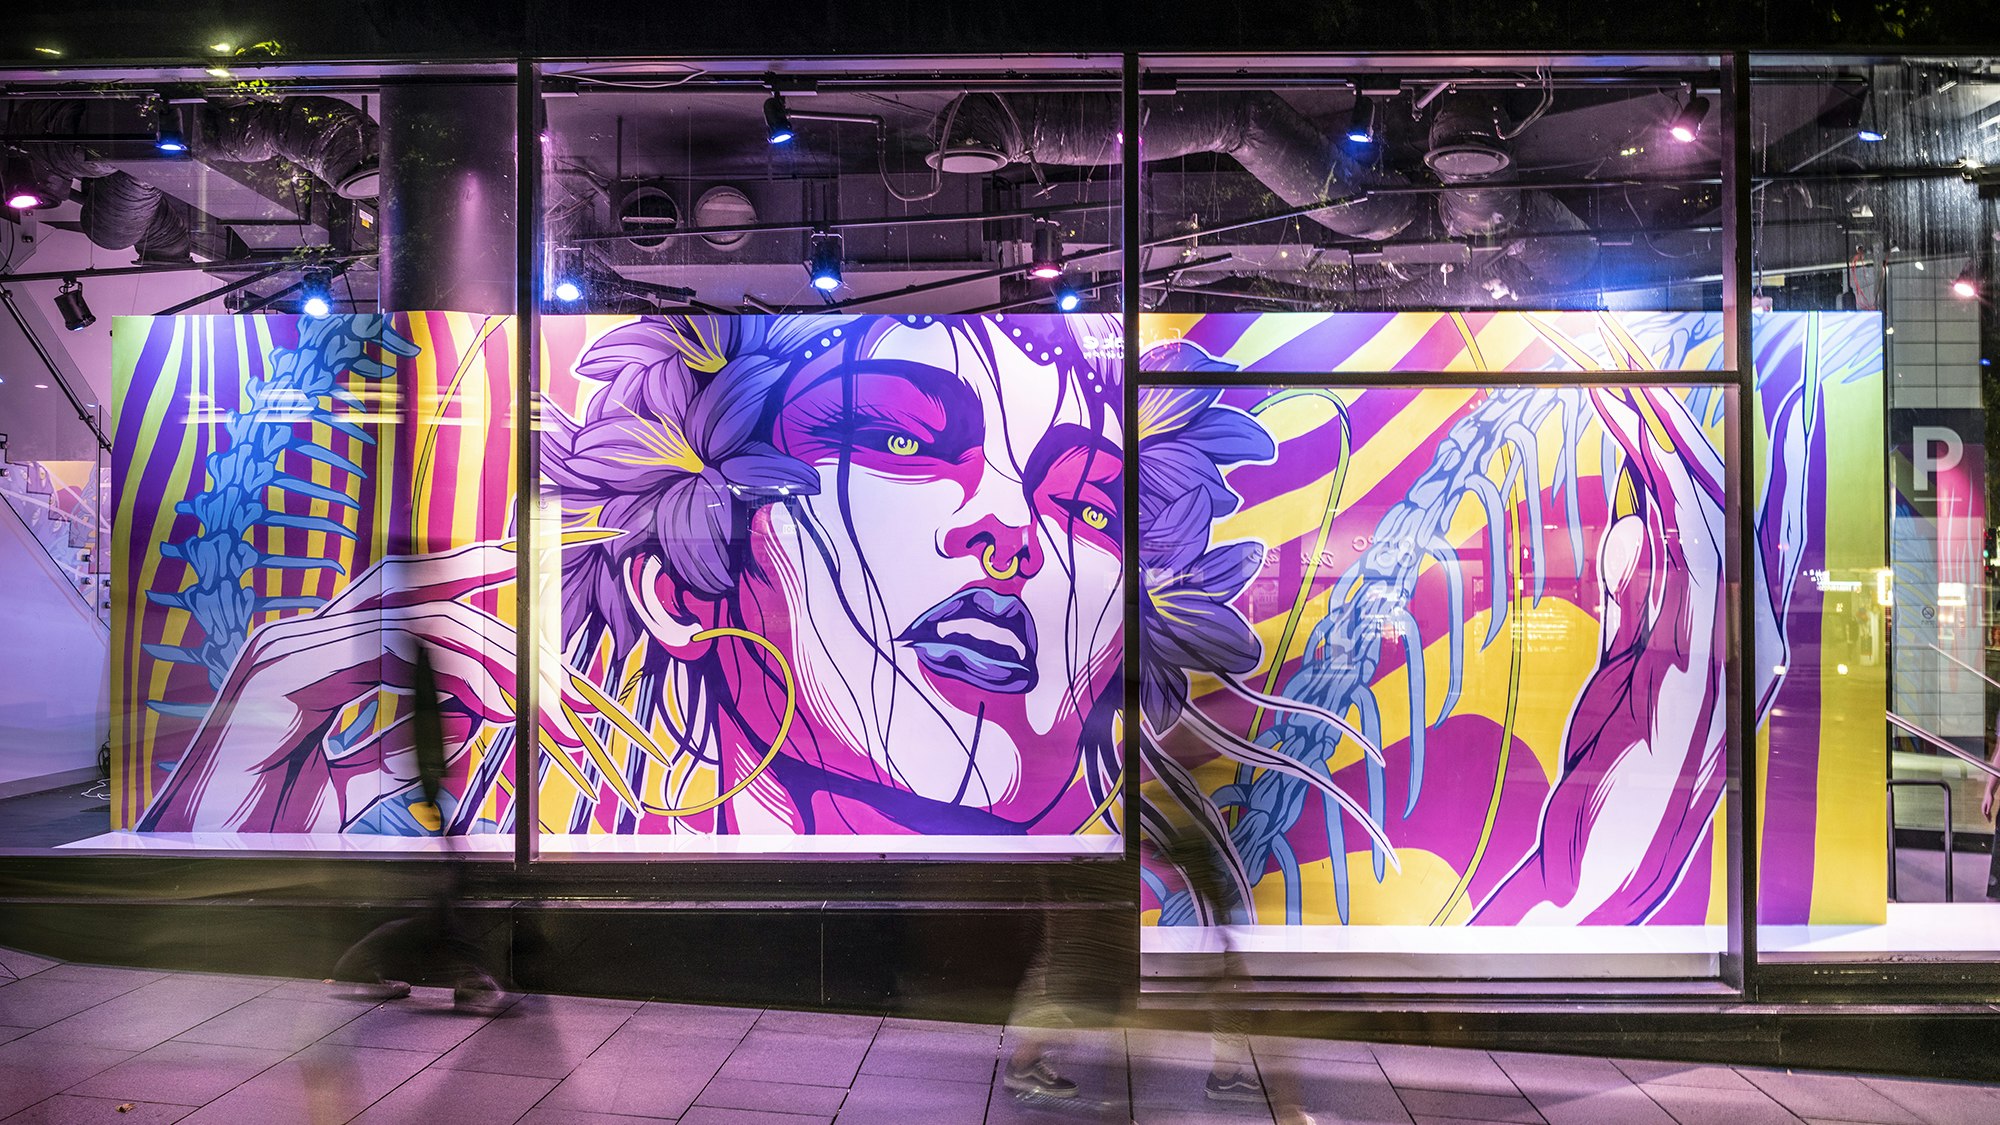 Behind a glass gallery front is a neon pink mural of a woman with purple lilies in her hair, neon pink shadows on the contours of her face, green pupils and blue lips. She has a gold septum ring in her nose. Her hands are raised by her face.